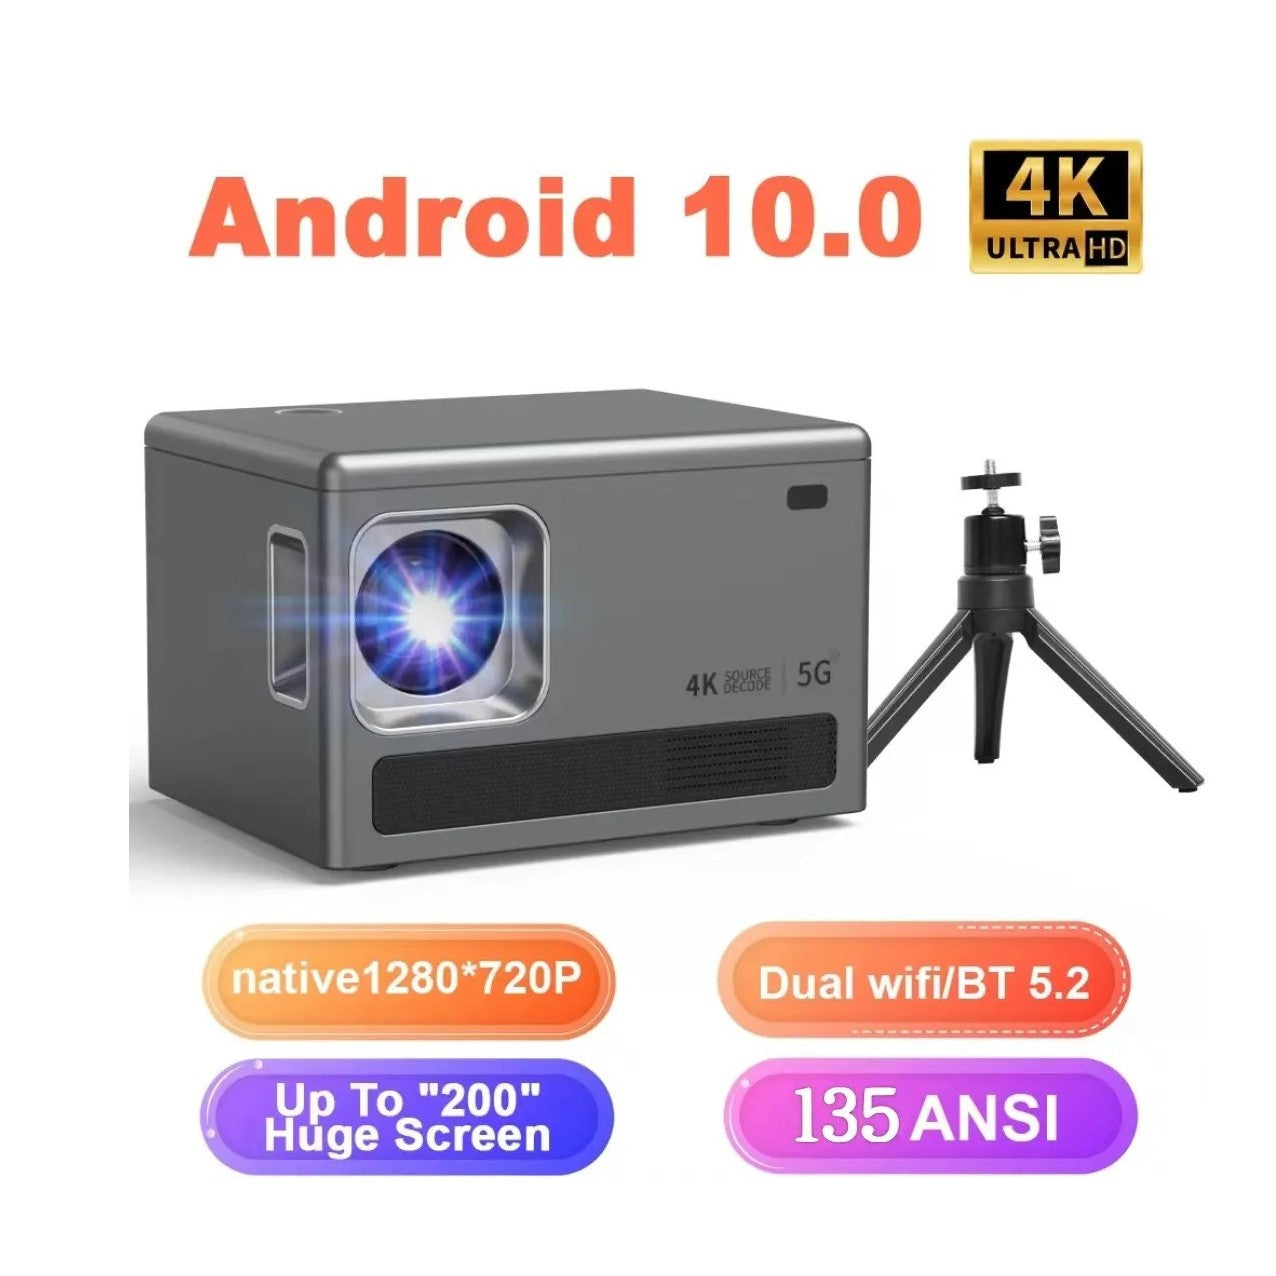 Transpeed S2 Smart Portable Projector - Dual Wifi Speaker - Native 1280*720P, 4K Support - Android 10.0 - BT 5.2 - 200'' Screen Projection